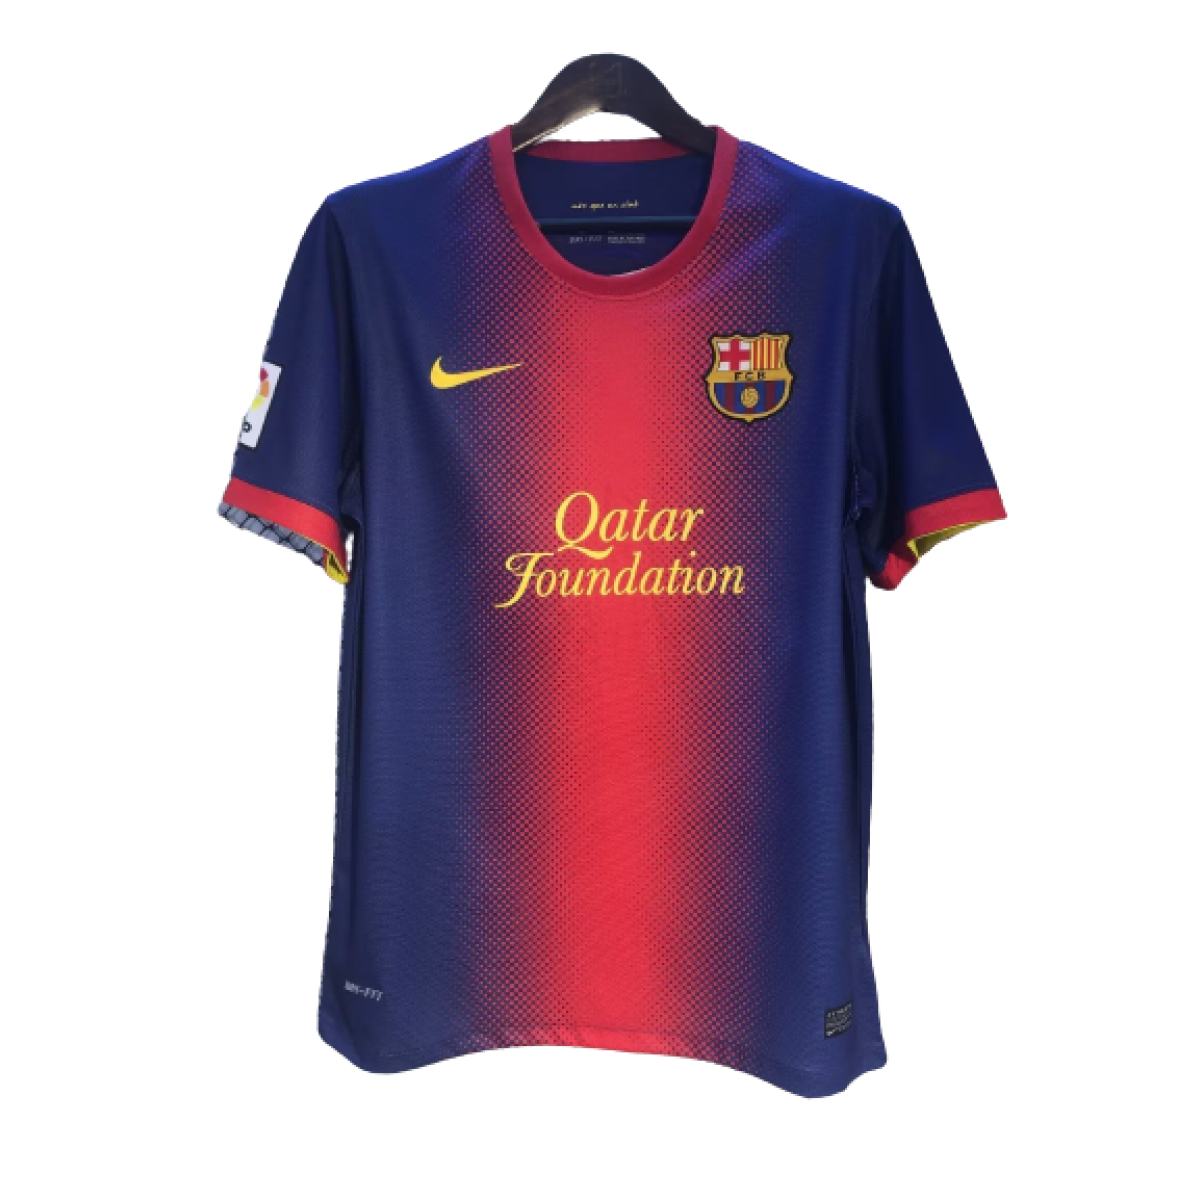 https://tucamiseta.cl/wp-content/uploads/2023/02/4-removebg-preview-1-1200x1200.png